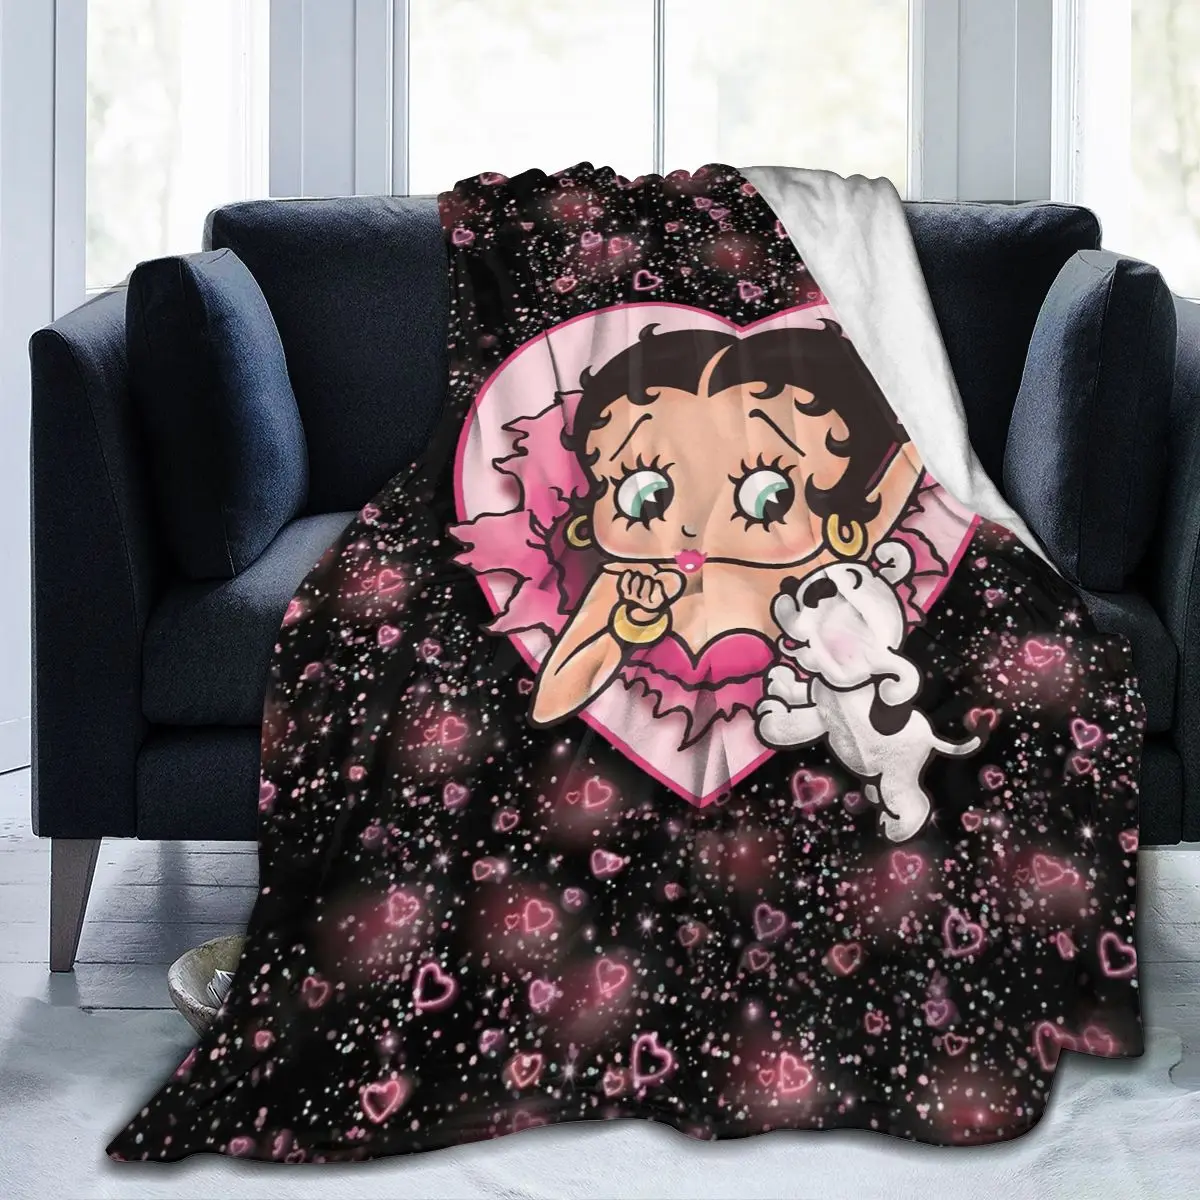 

Blanket Betty Boopes Blanket Flannel Throw Blankets Micro Fleece Cozy Plush Covers for Bed Car and Home Decoration Gift for Girl